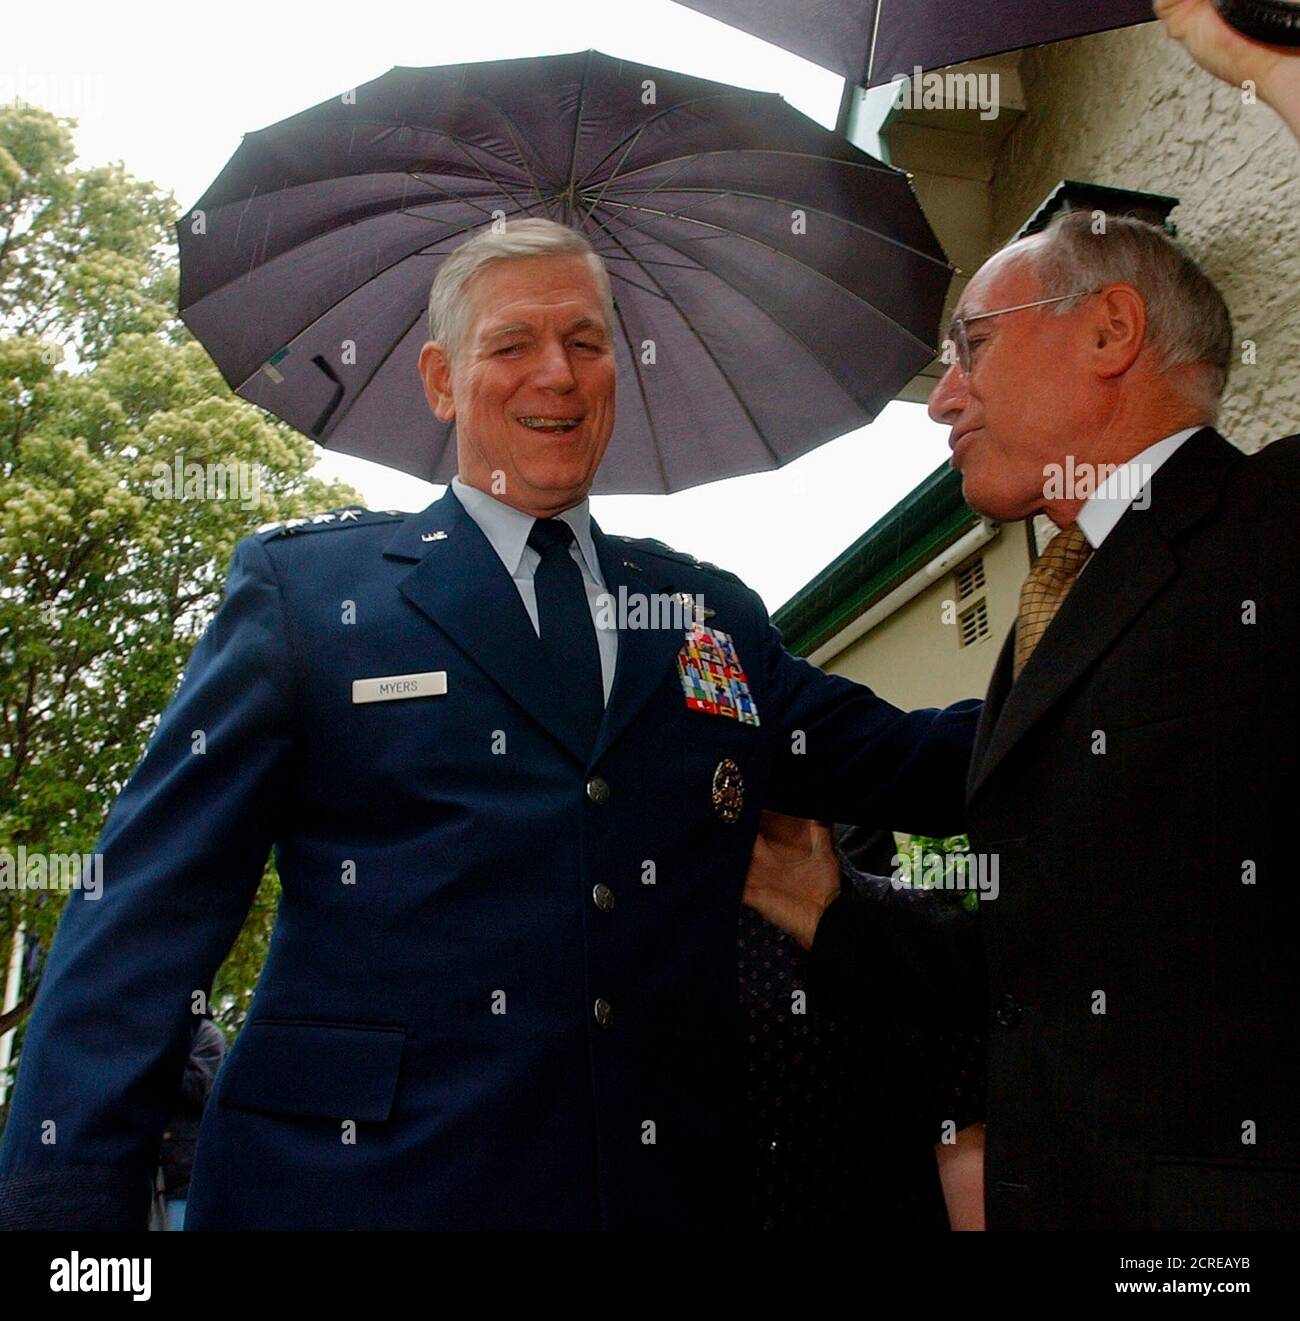 Chairman of the United States Joint Chiefs of Staff, General Richard Myers (L), is met by Australian Prime Minister John Howard at Howard's Sydney residence as rain falls January 16, 2004. General Myers is visiting Australia as part of a nine-day international tour. REUTERS/Rick Rycroft/Pool  RR/MY Stock Photo